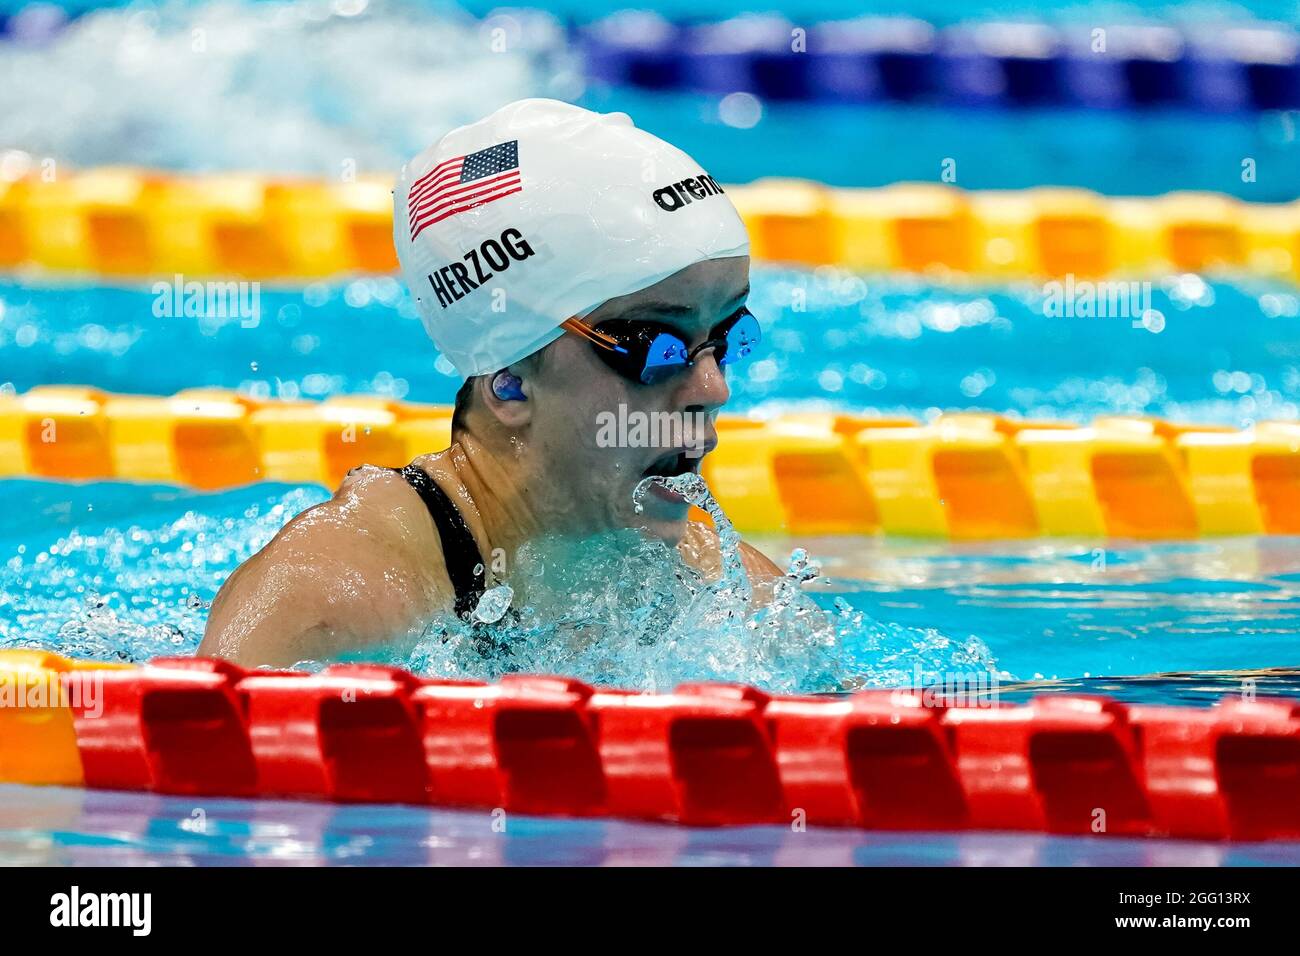 TOKYO, JAPAN - AUGUST 28: Sophia Herzog of the United States competing in the Women's 100m Breaststroke SB6 Heats during the Tokyo 2020 Paralympic Games at Tokyo Aquatics Centre on August 28, 2021 in Tokyo, Japan (Photo by Ilse Schaffers/Orange Pictures) NOCNSF Stock Photo